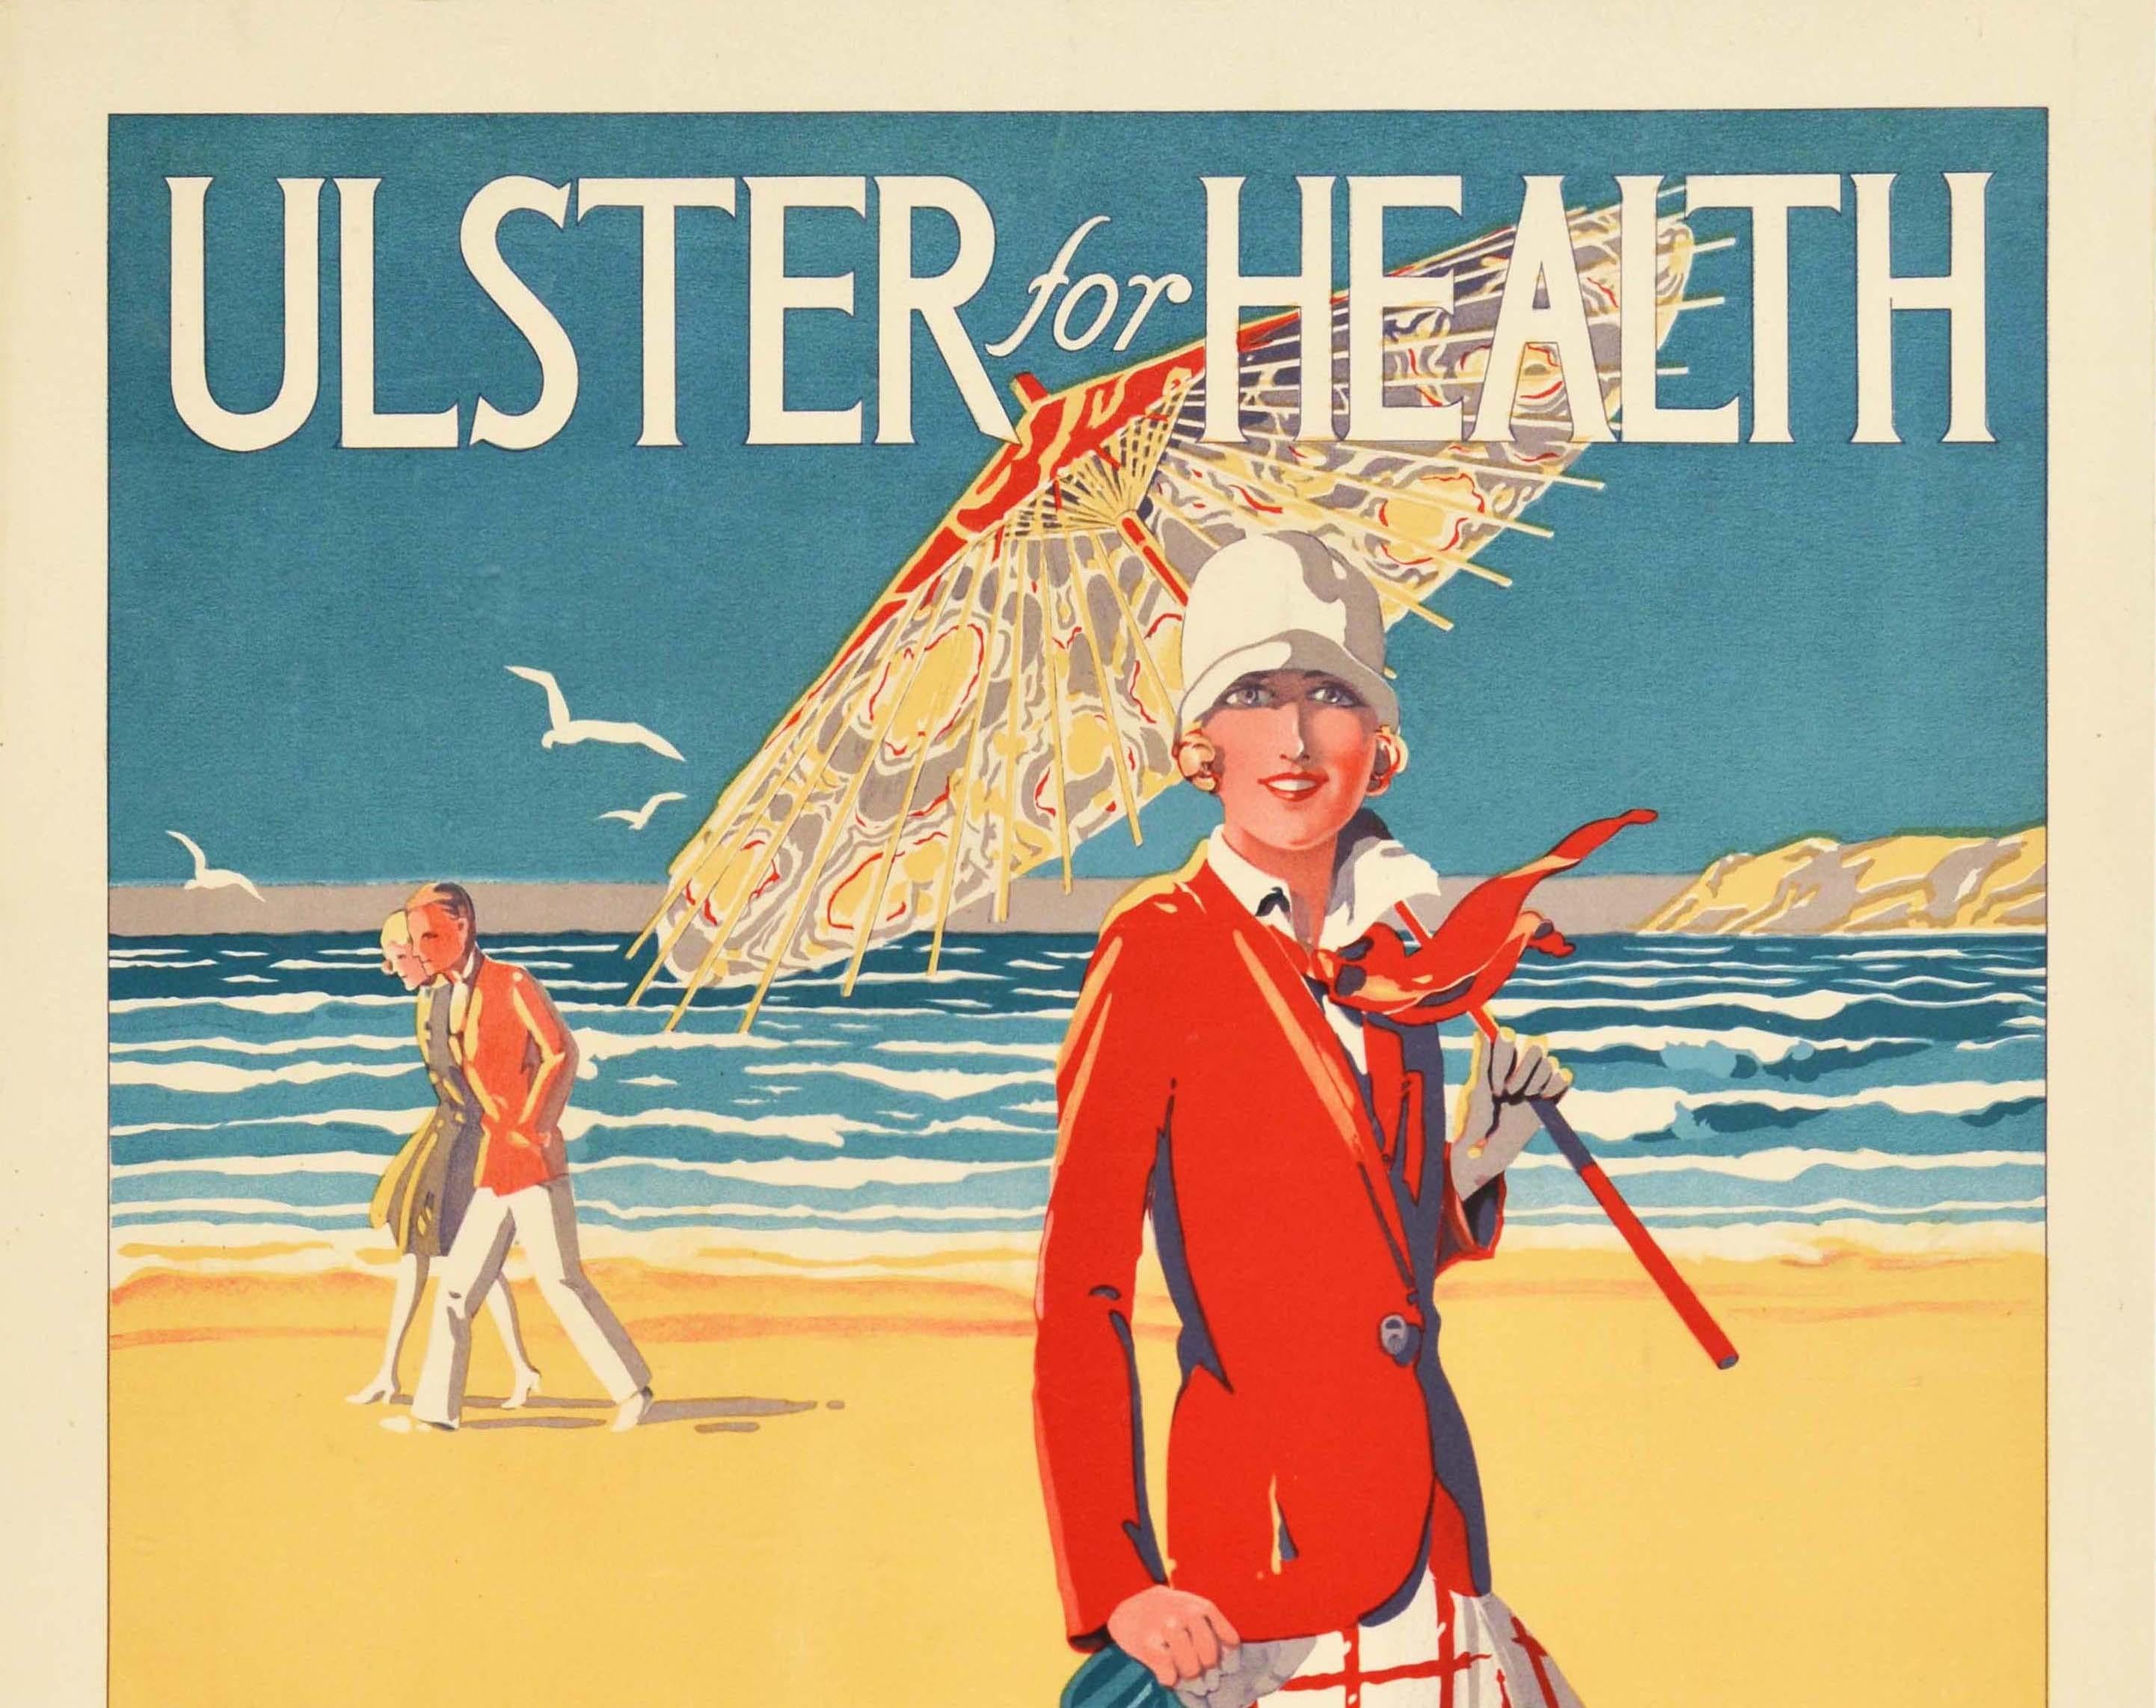 Original Vintage Art Deco Poster Ulster For Health Ireland Travel Beach Dog Walk - Print by M. Rogers